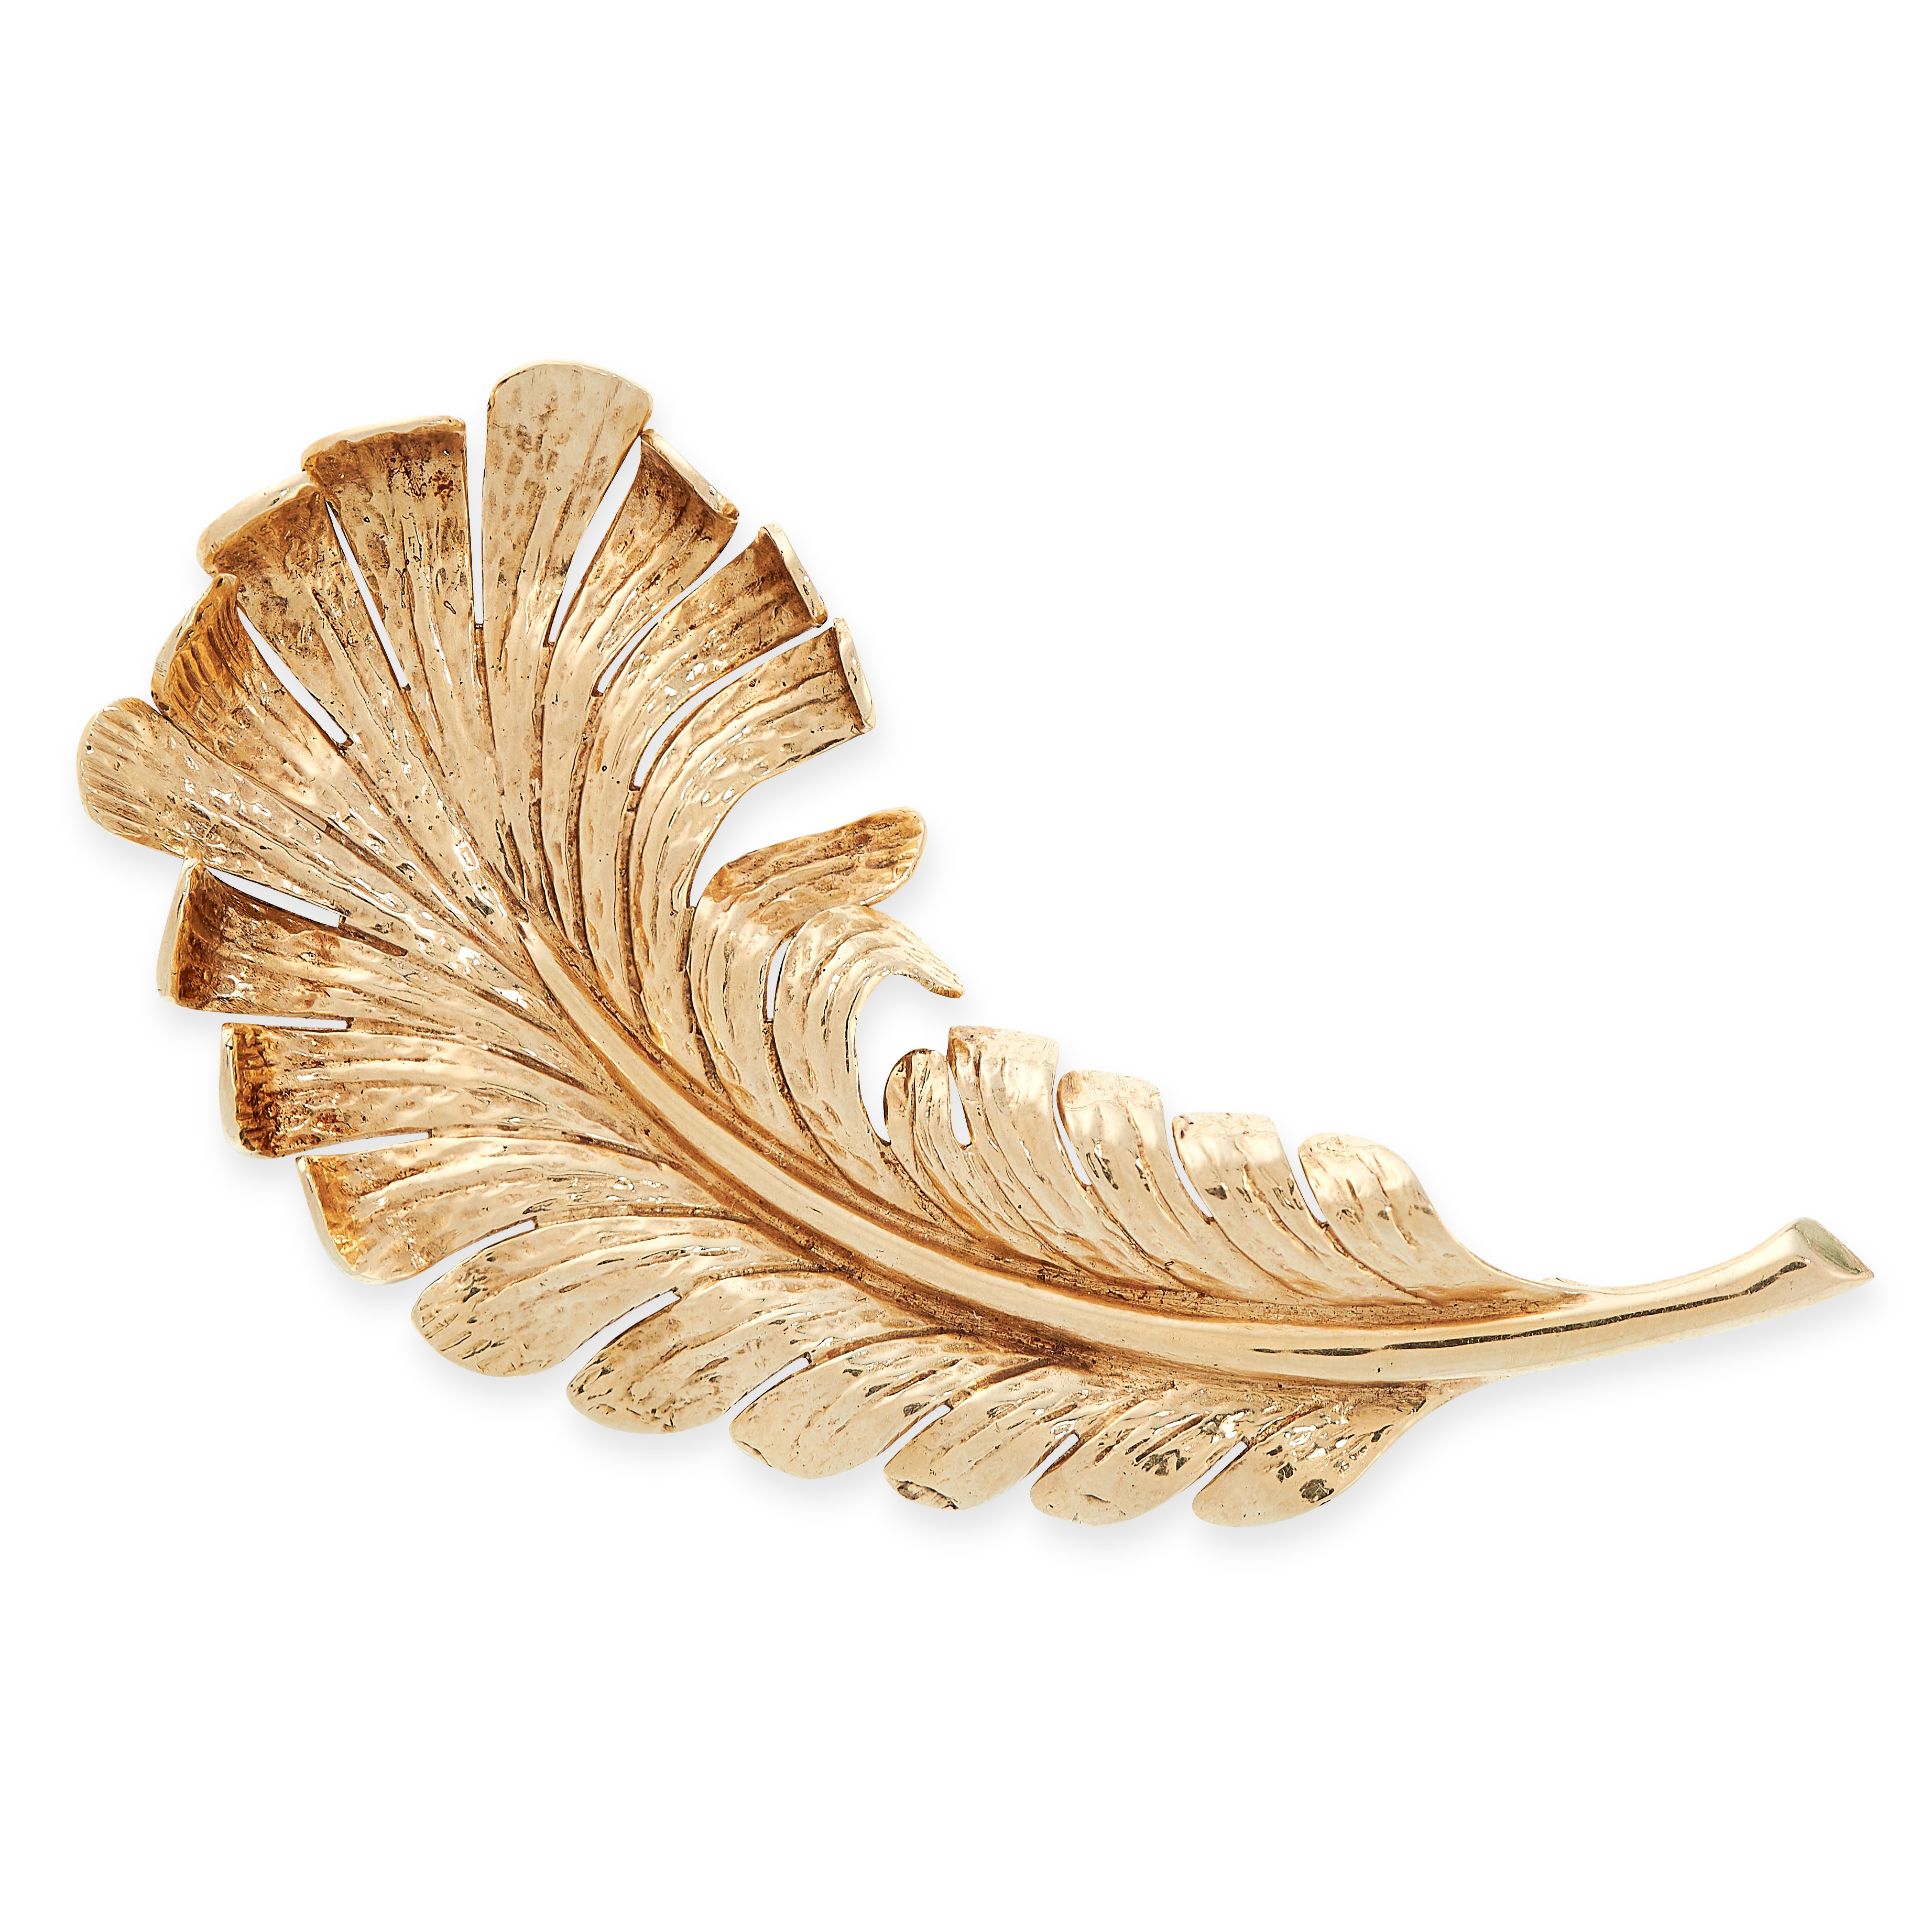 VINTAGE FEATHER BROOCH, CARTIER in the form of a twisted feather with engraved details, signed